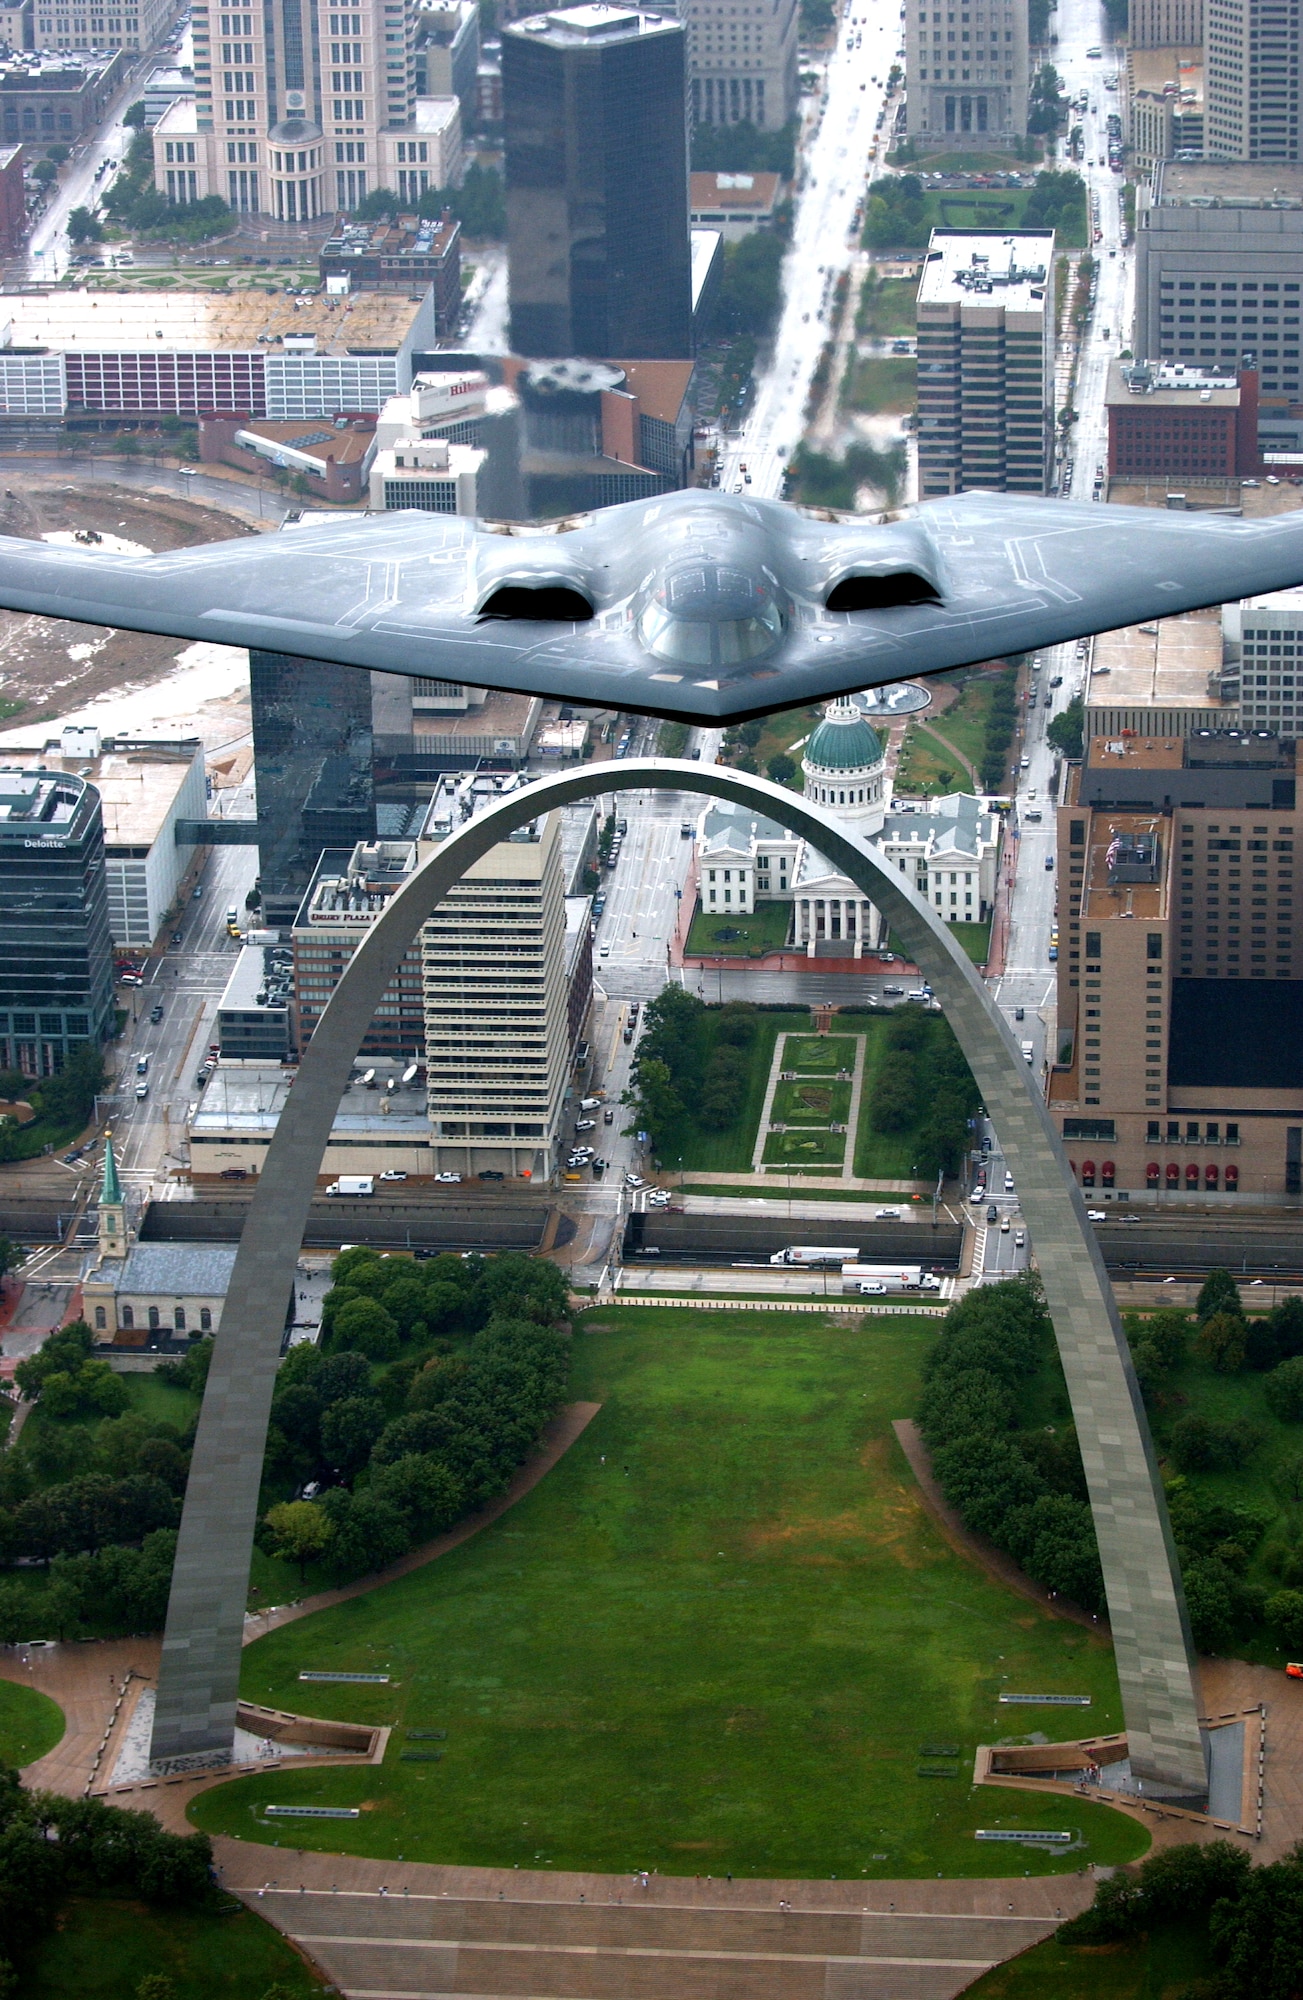 A B-2 Stealth bomber from the 509th Bomb Wing at Whiteman Air Force Base, Mo., flies over the St. Louis Arch on Aug. 10. The B-2 flyover was one of several events celebrating Air Force Week in St. Louis. (U.S. Air Force photo/Tech. Sgt. Justin D. Pyle)